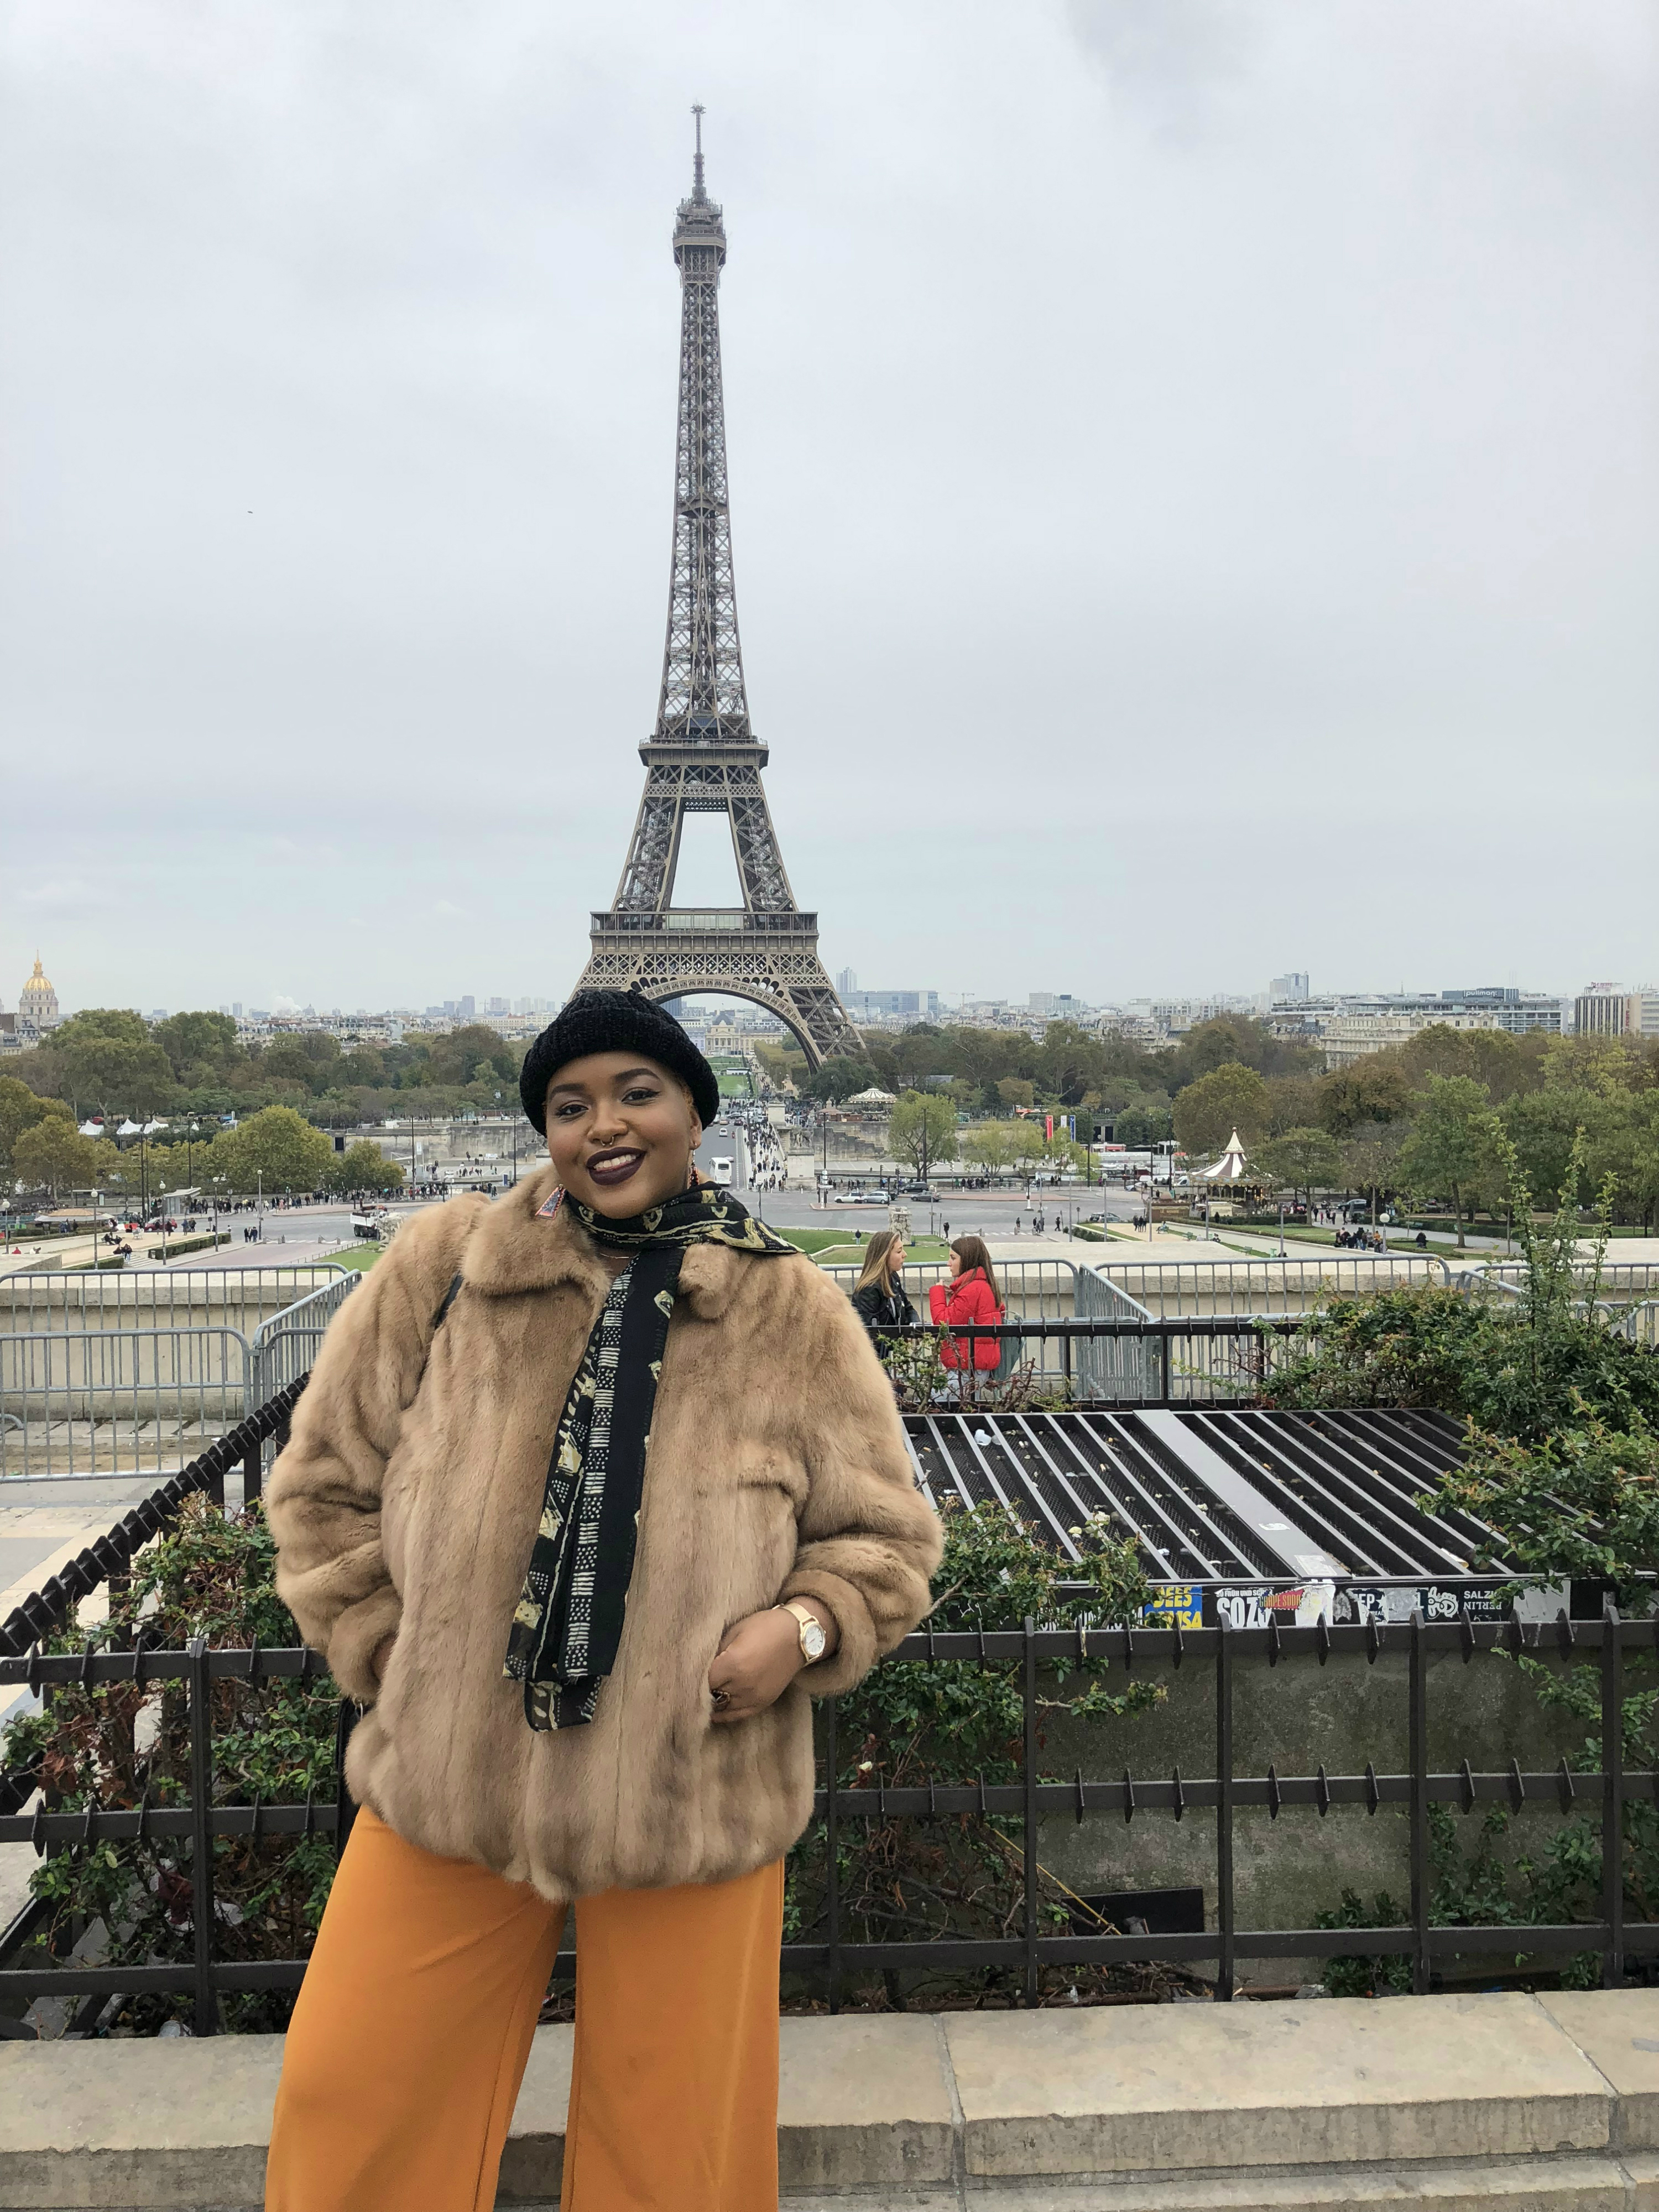 Eva Maria Lewis stands in front of the Eiffel Tower in Paris